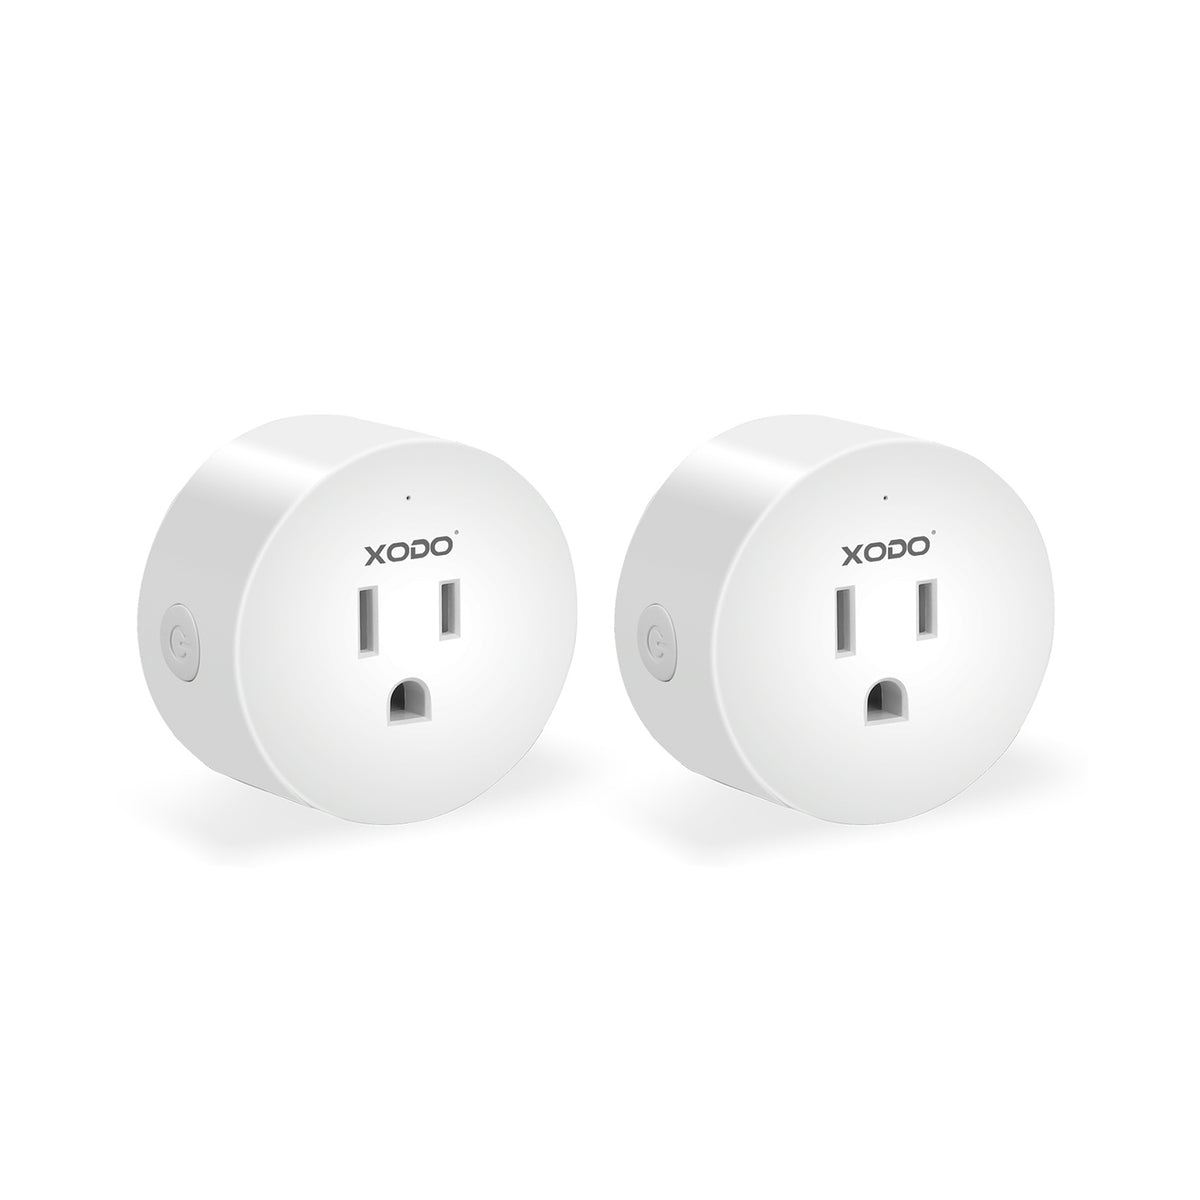 TP-Link Tapo Smart Wi-Fi Plug Mini with Matter - White - 2 Pack